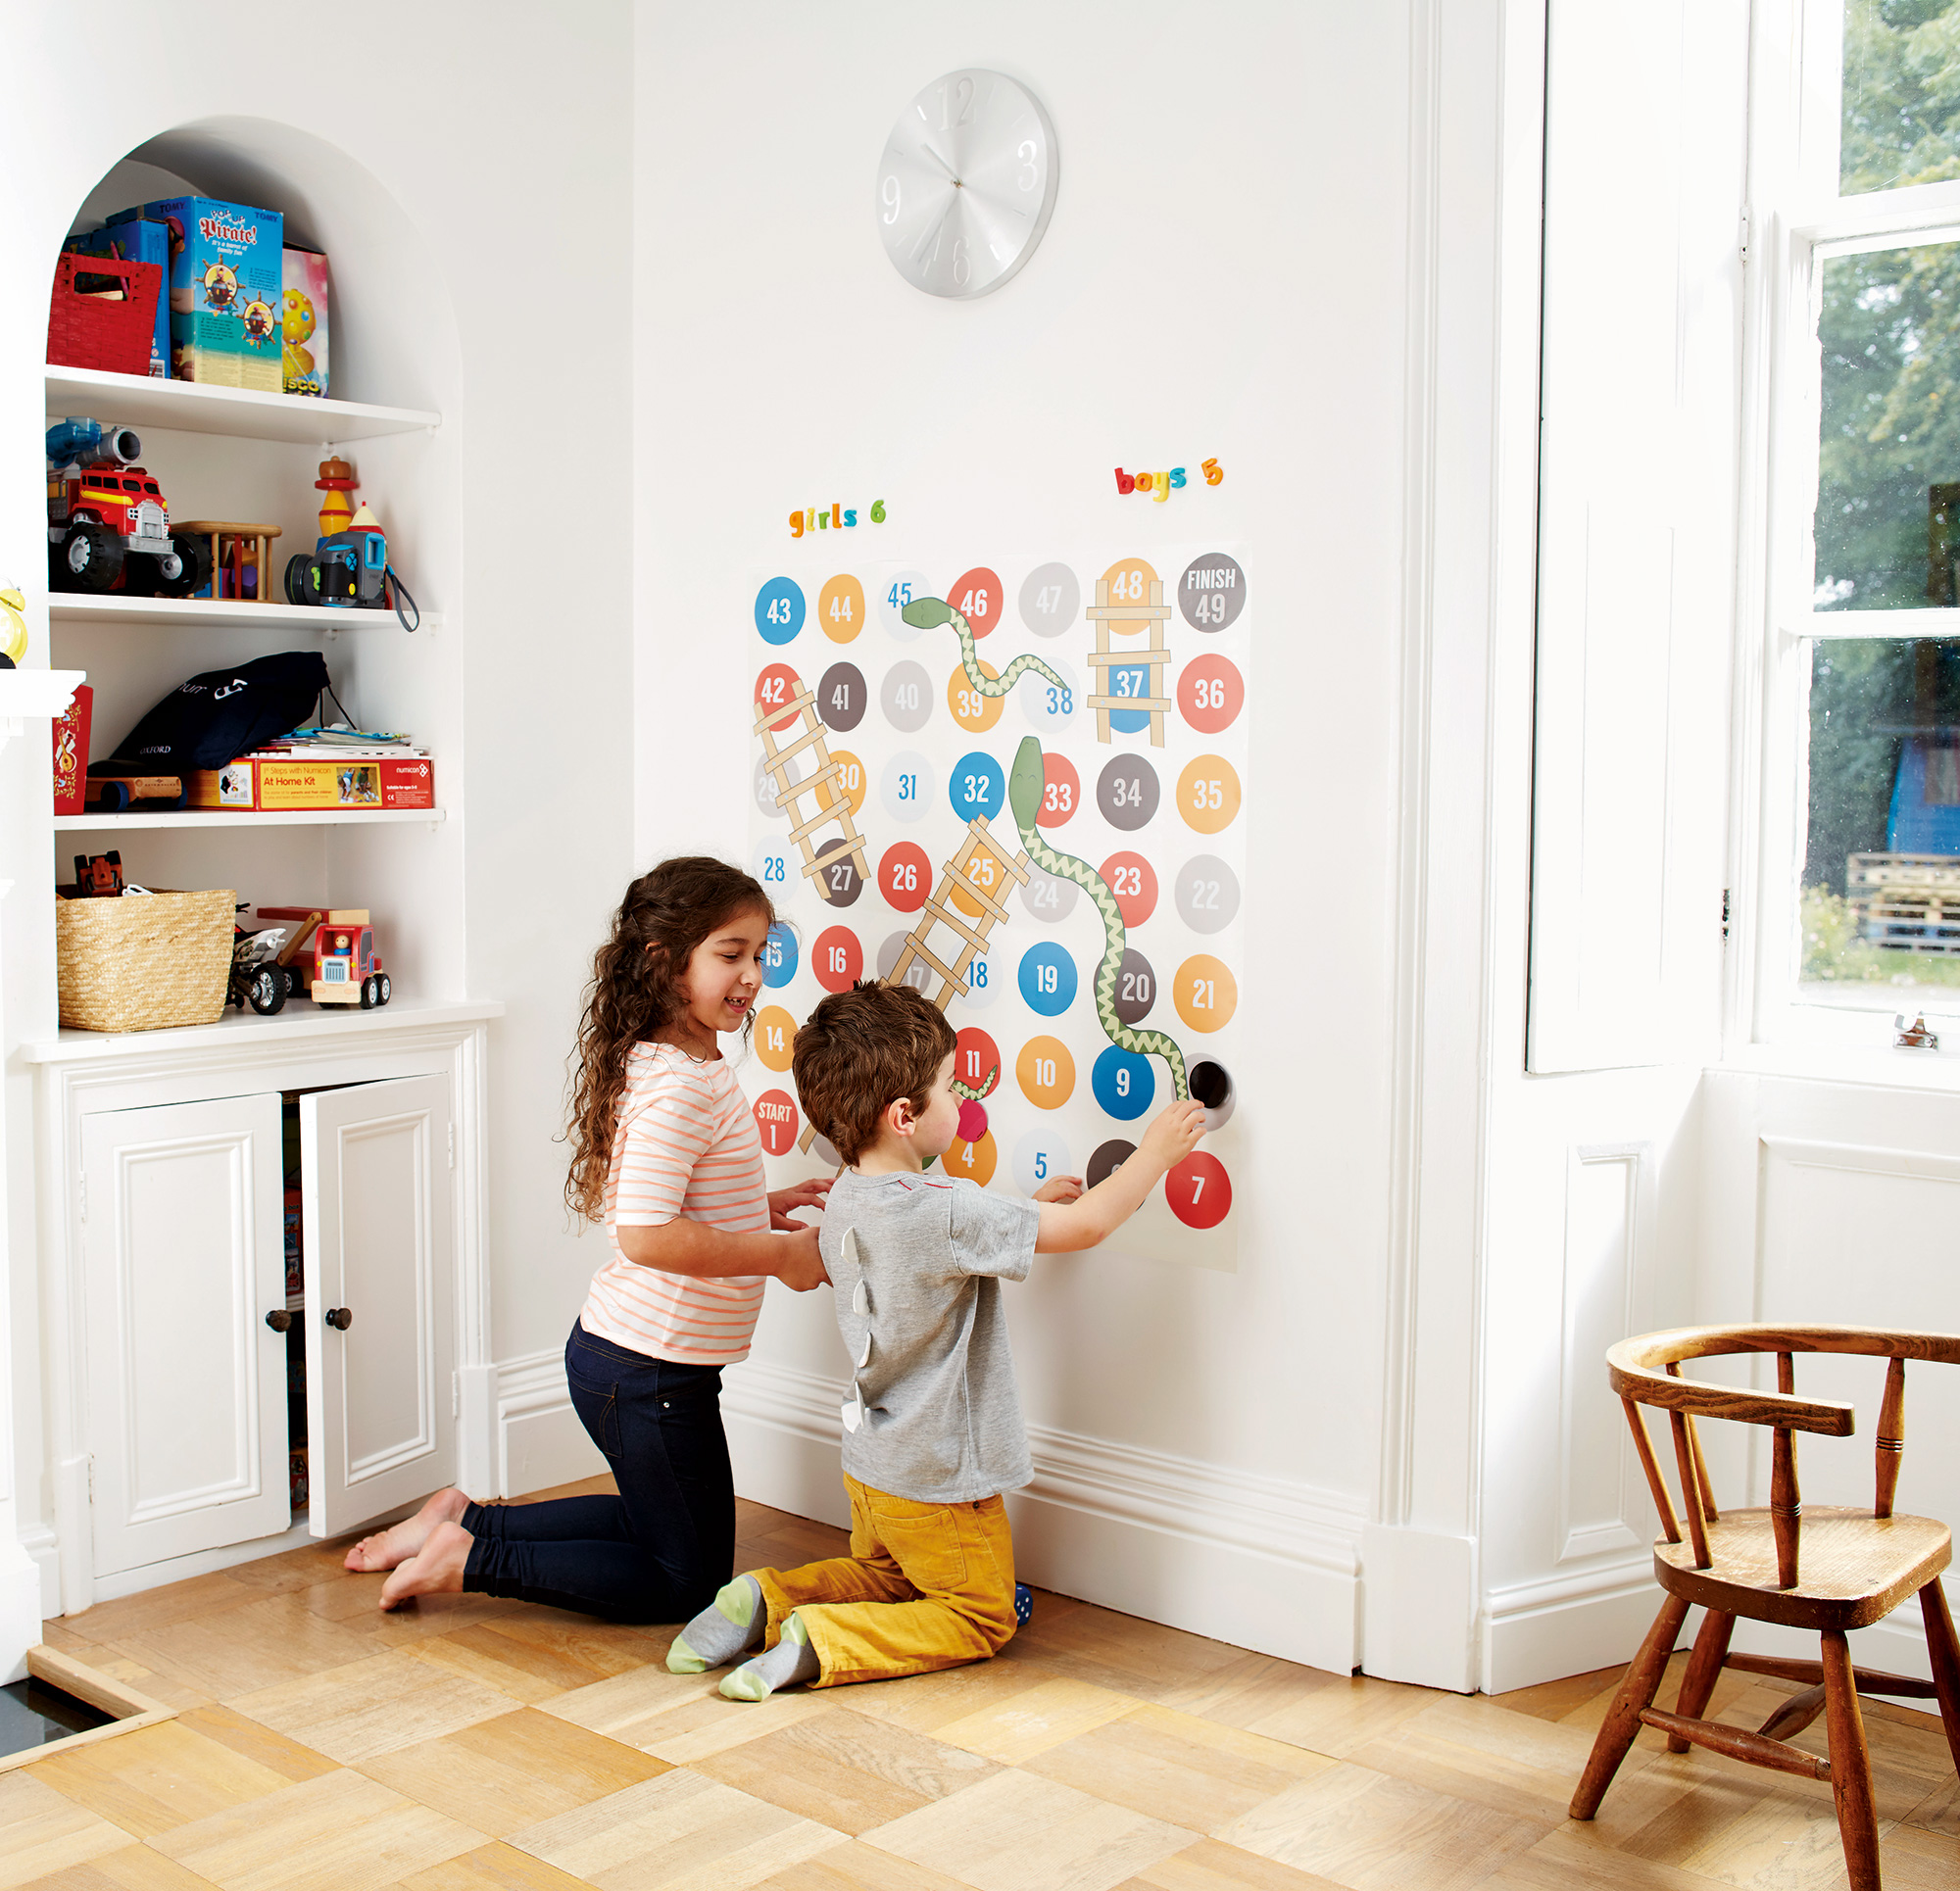 Children playing on magnetic wall